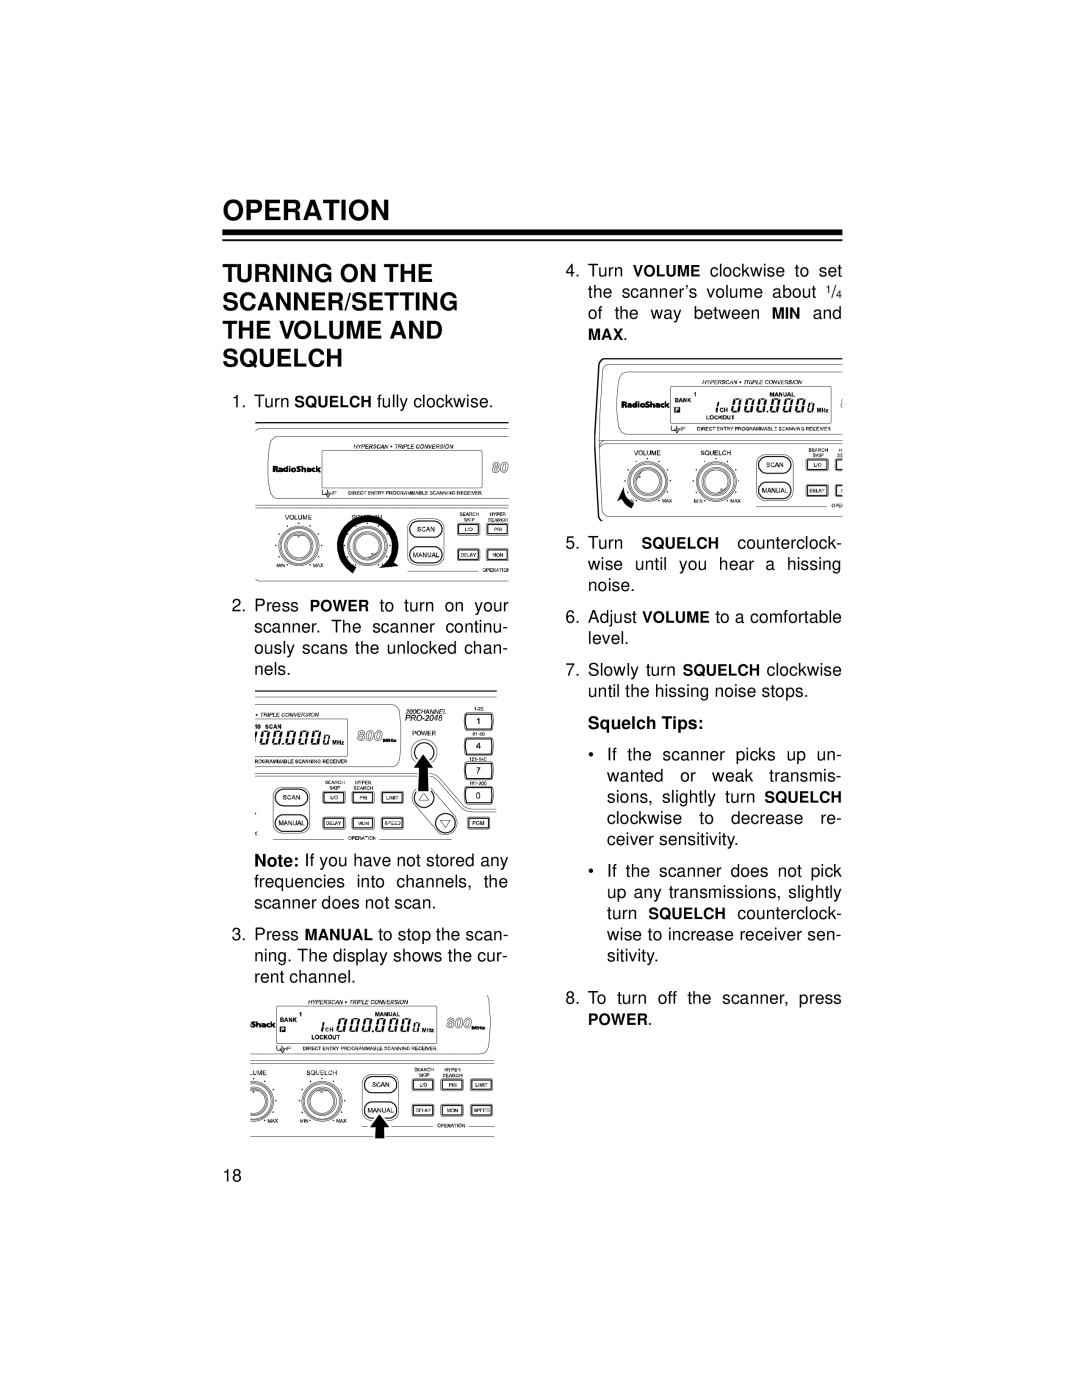 Radio Shack PRO-2048 owner manual Operation, Turning on the SCANNER/SETTING the Volume and Squelch, Squelch Tips 